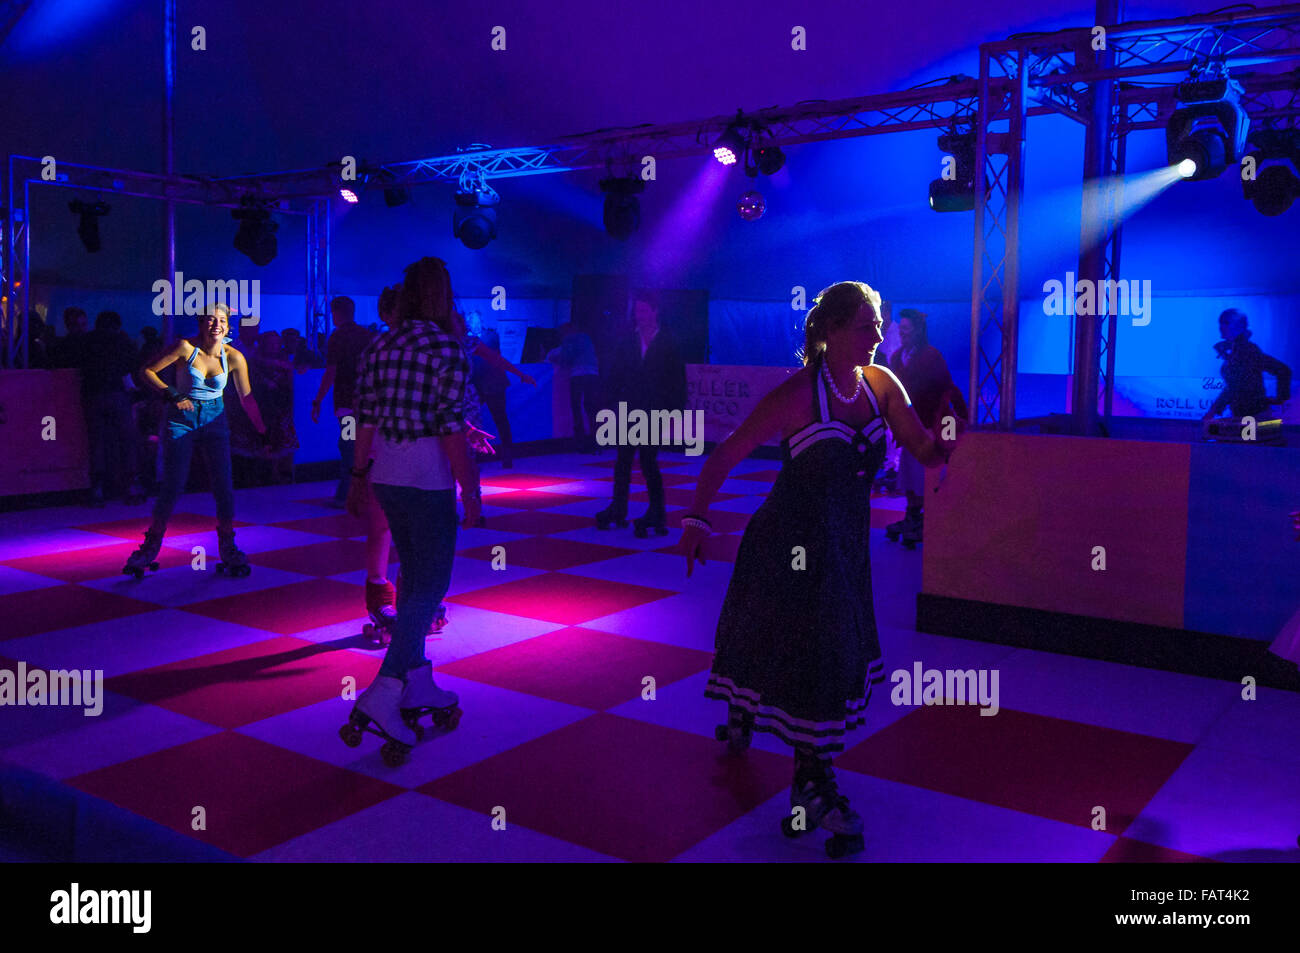 Goodwood Revival 2015. 50s style roller skating illustrated. Space for copy  Stock Photo - Alamy